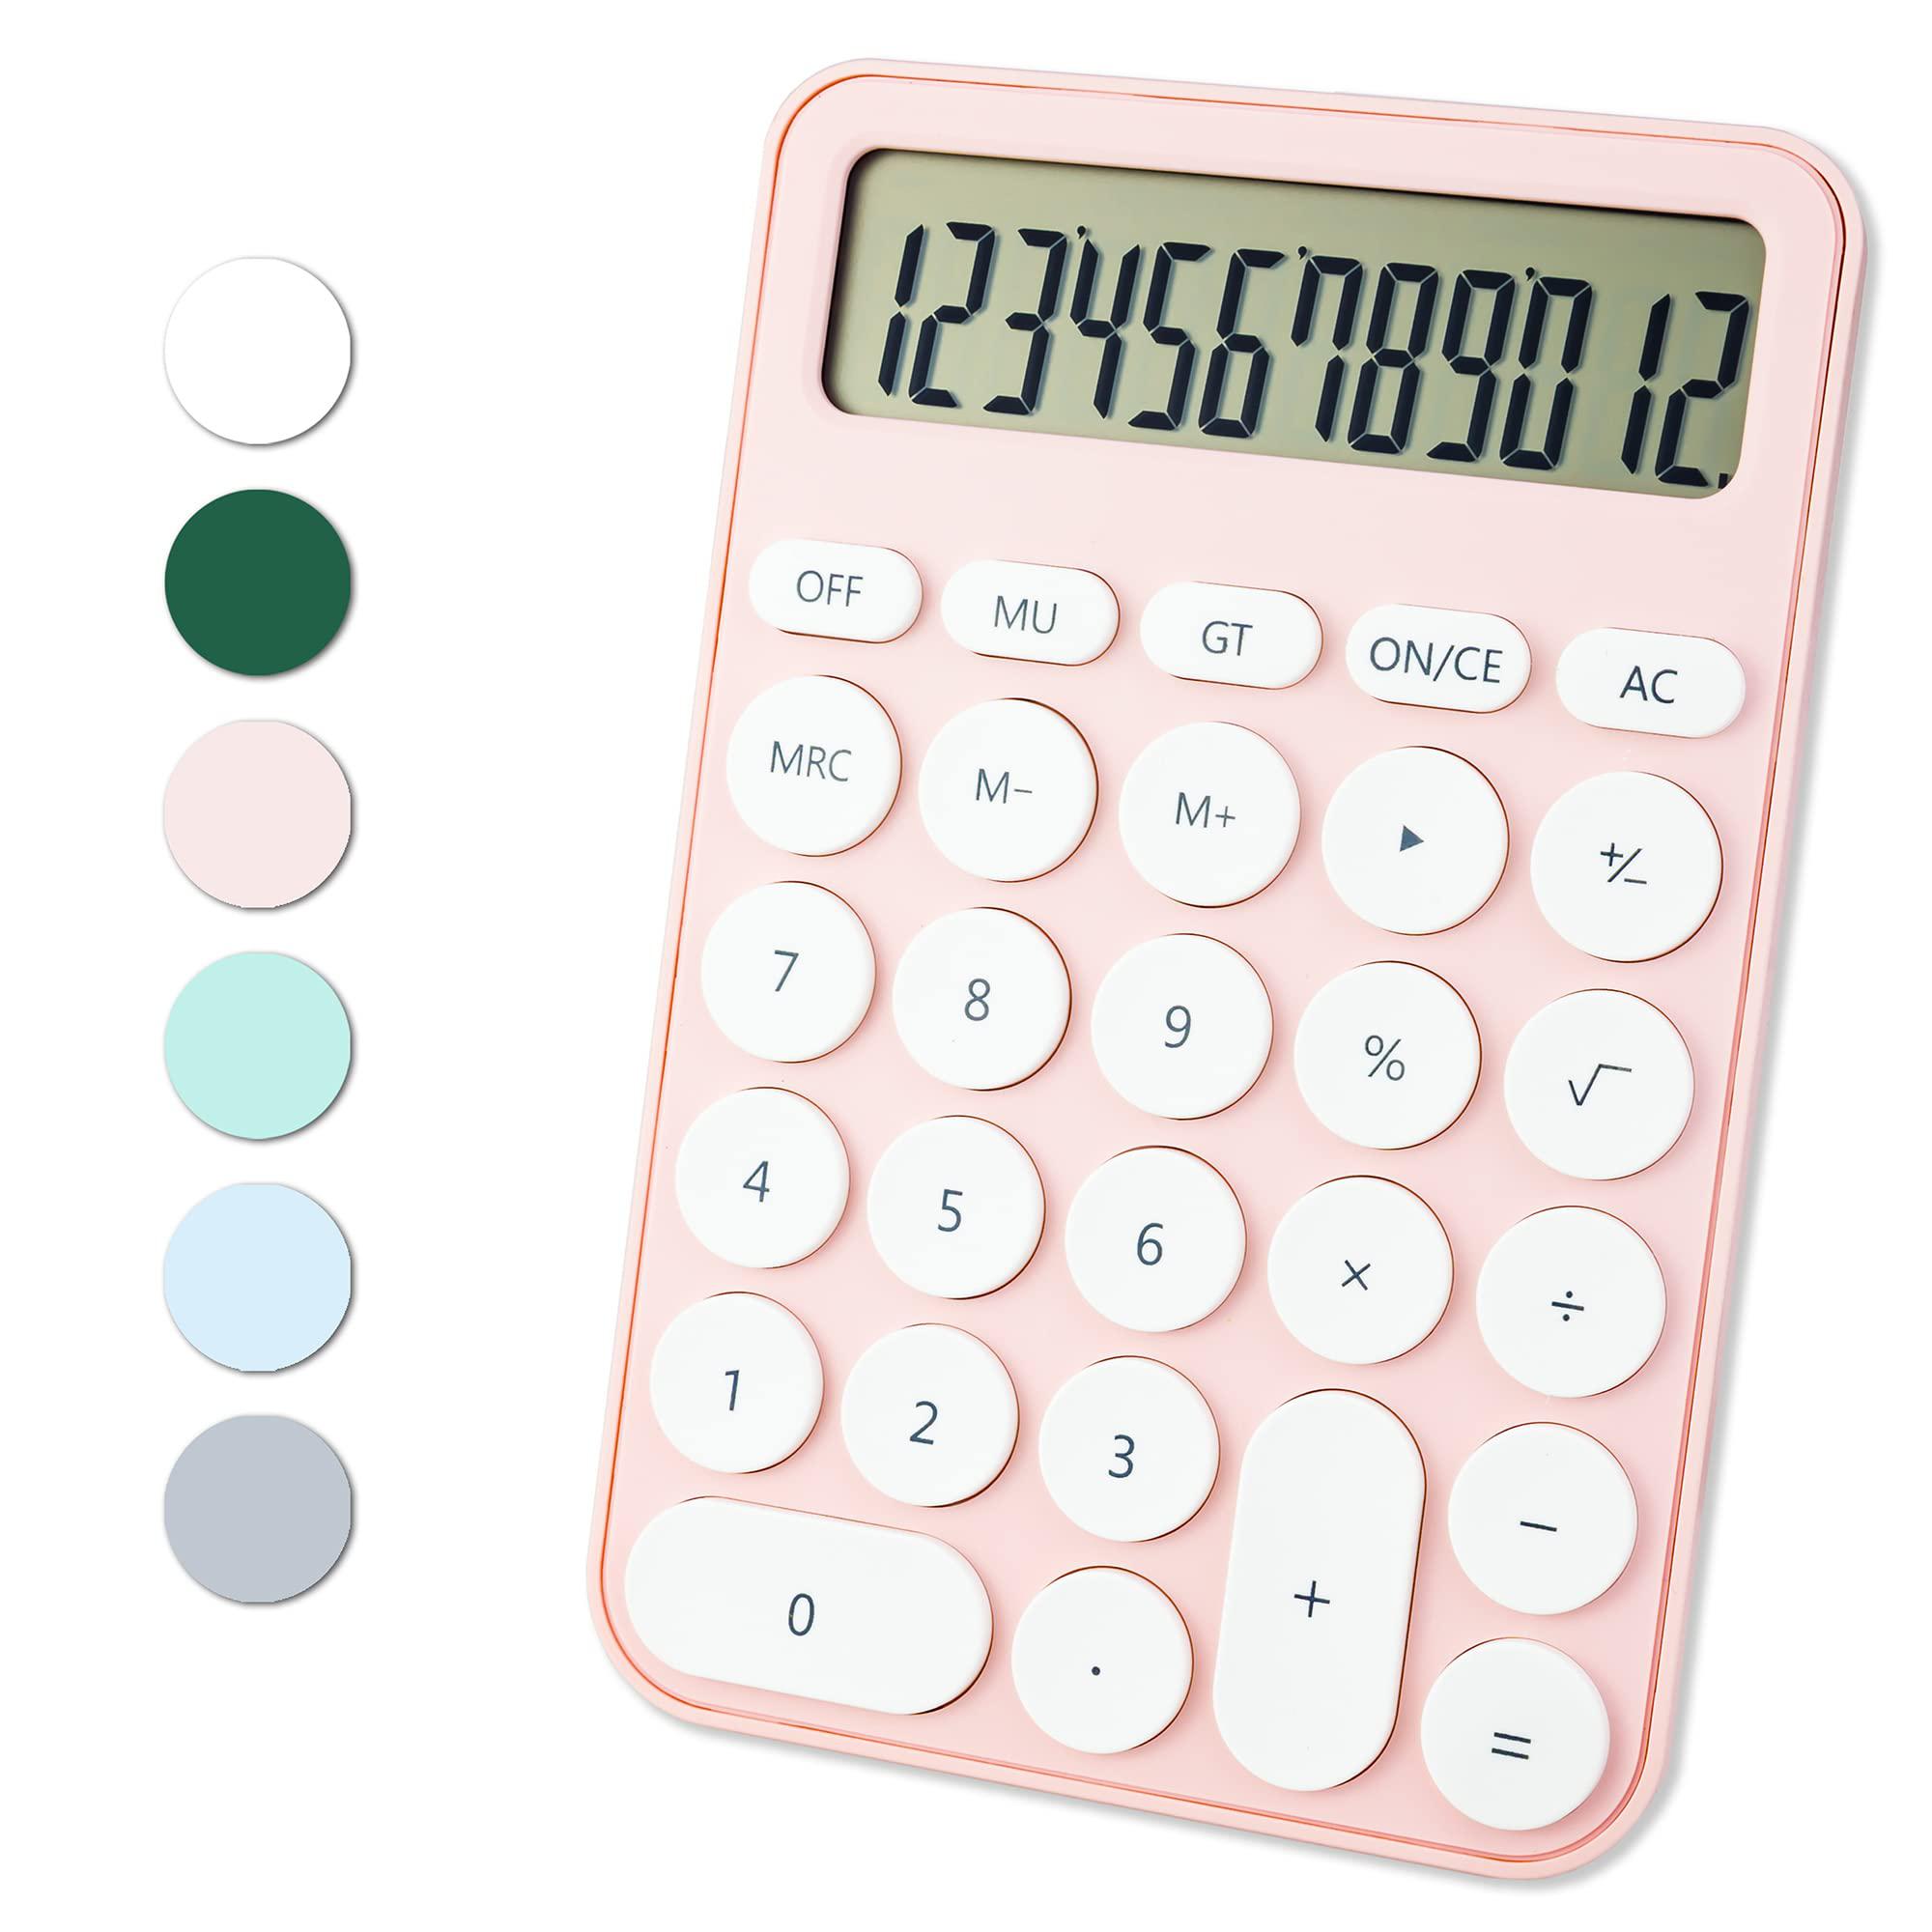 VEWINGL standard calculator 12 digit,6.2 * 4.2in desktop large display and buttons,calculator with large lcd display for office,schoo